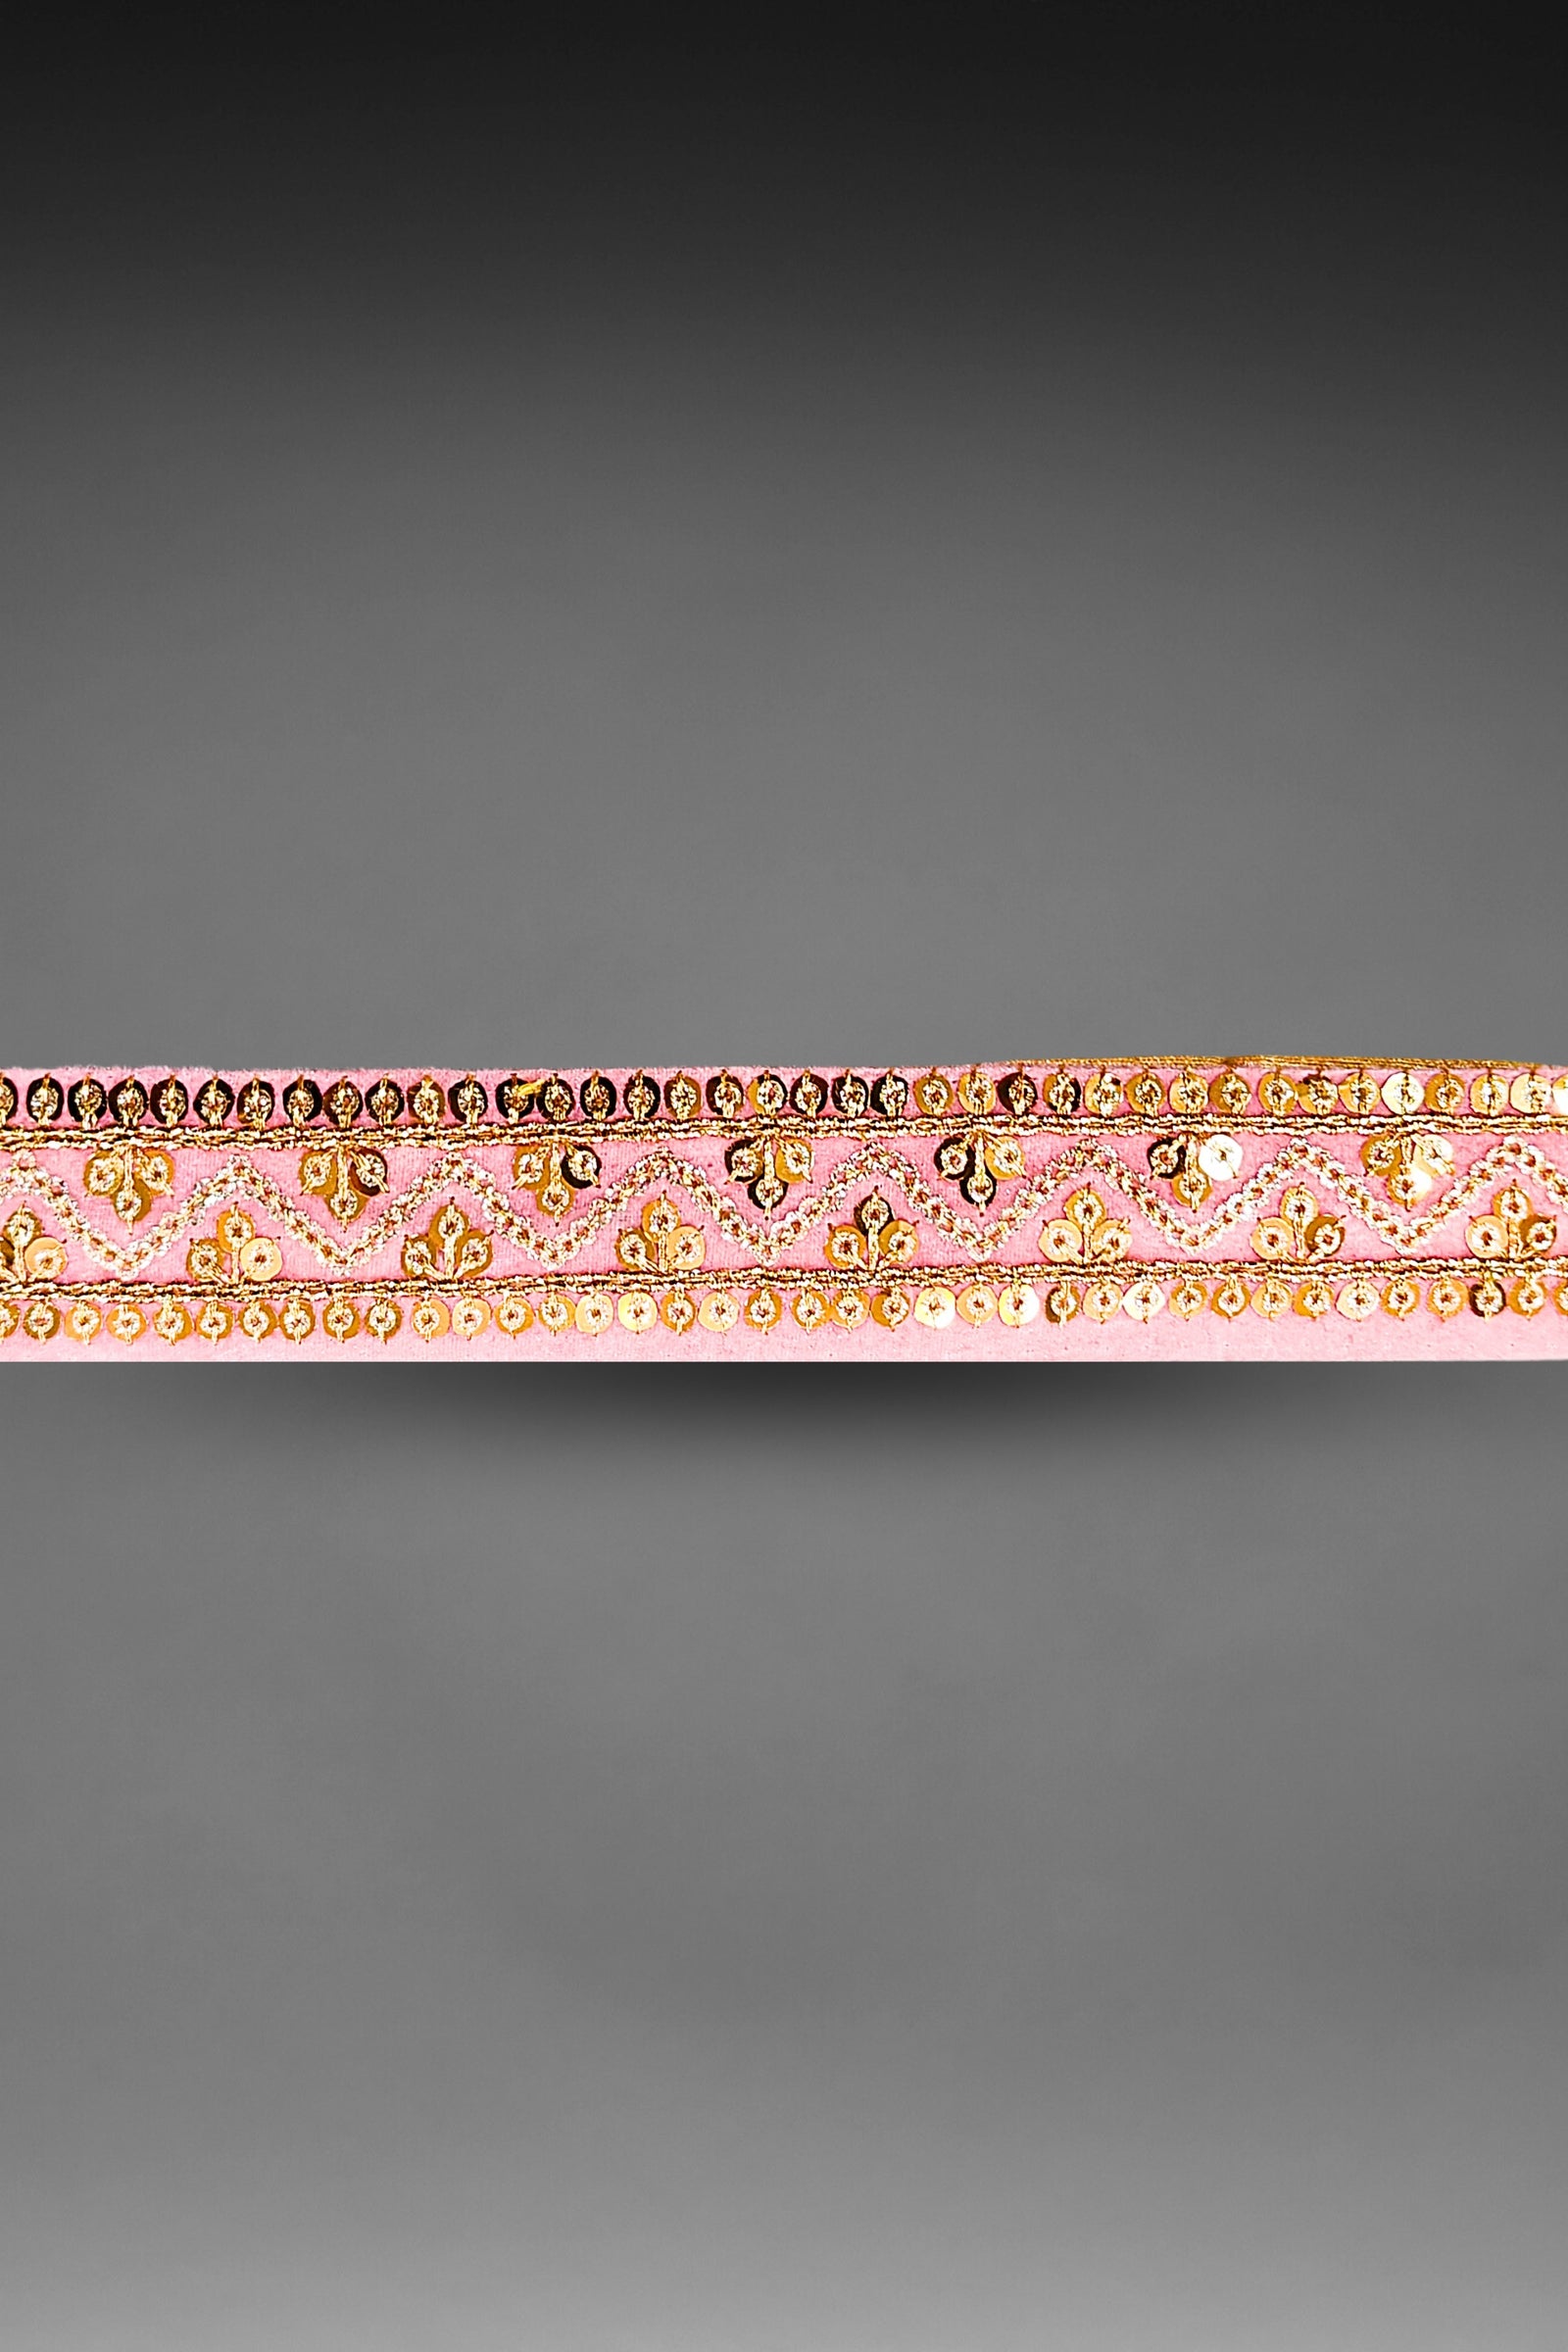 How To Incorporate Traditional Motifs Into Modern Saree Belt Designs